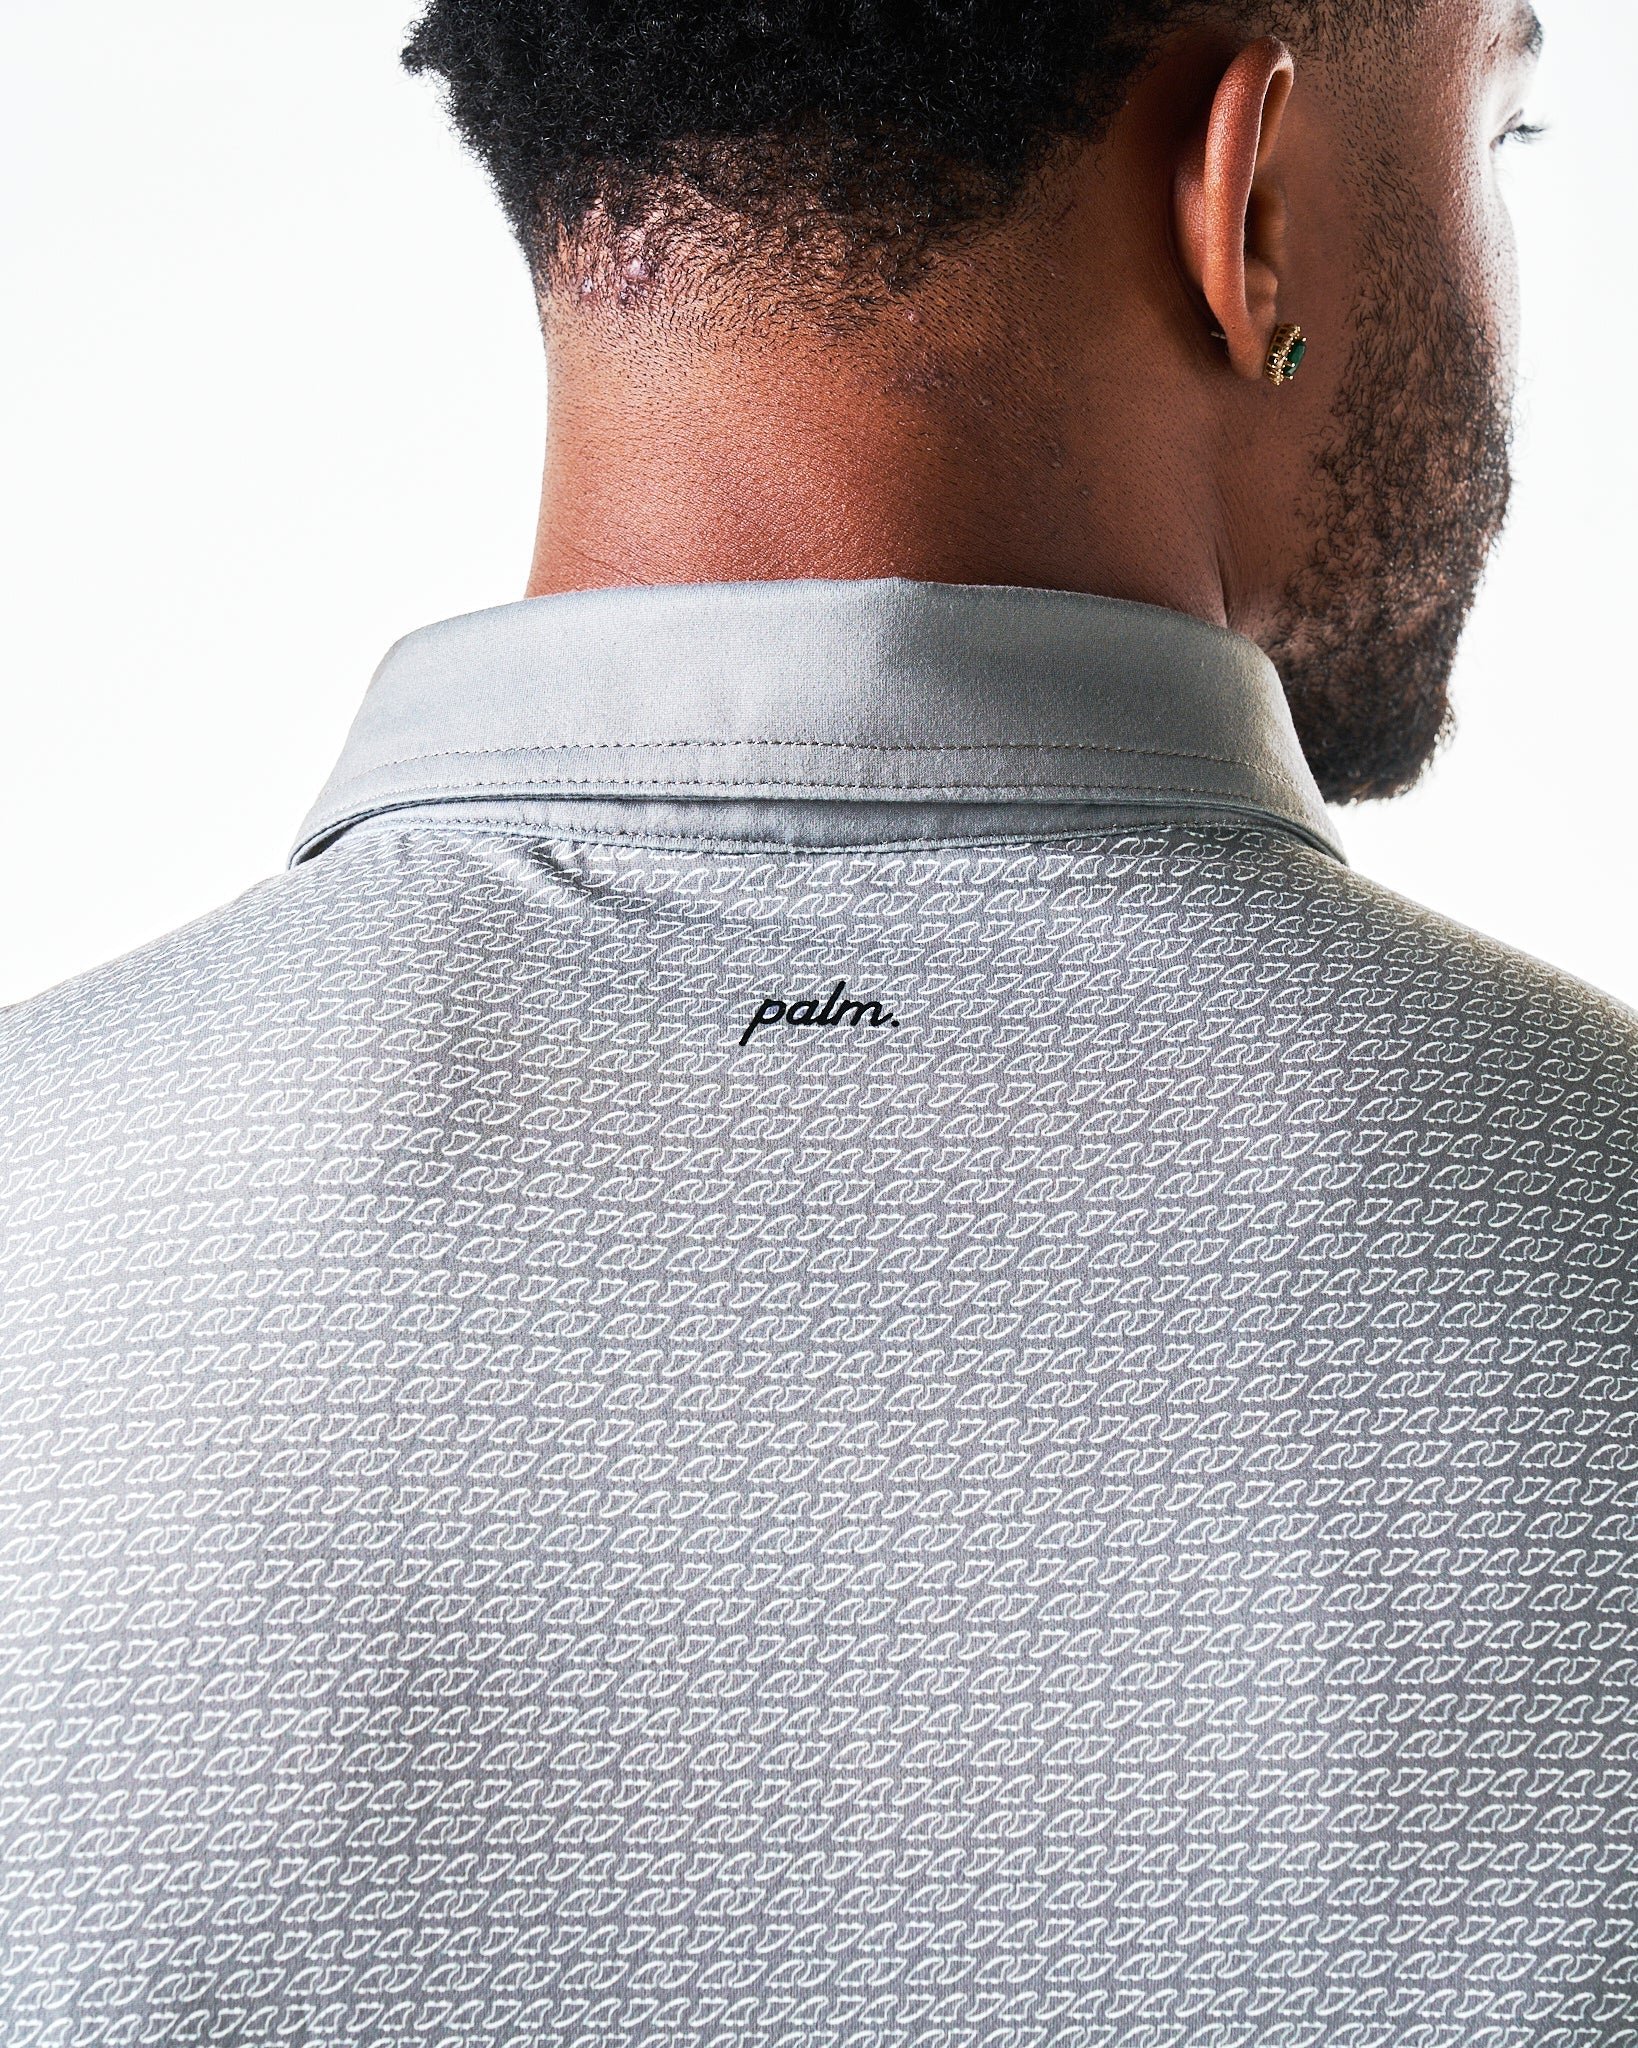 Palm Golf Co. Tailgate Performance Polo